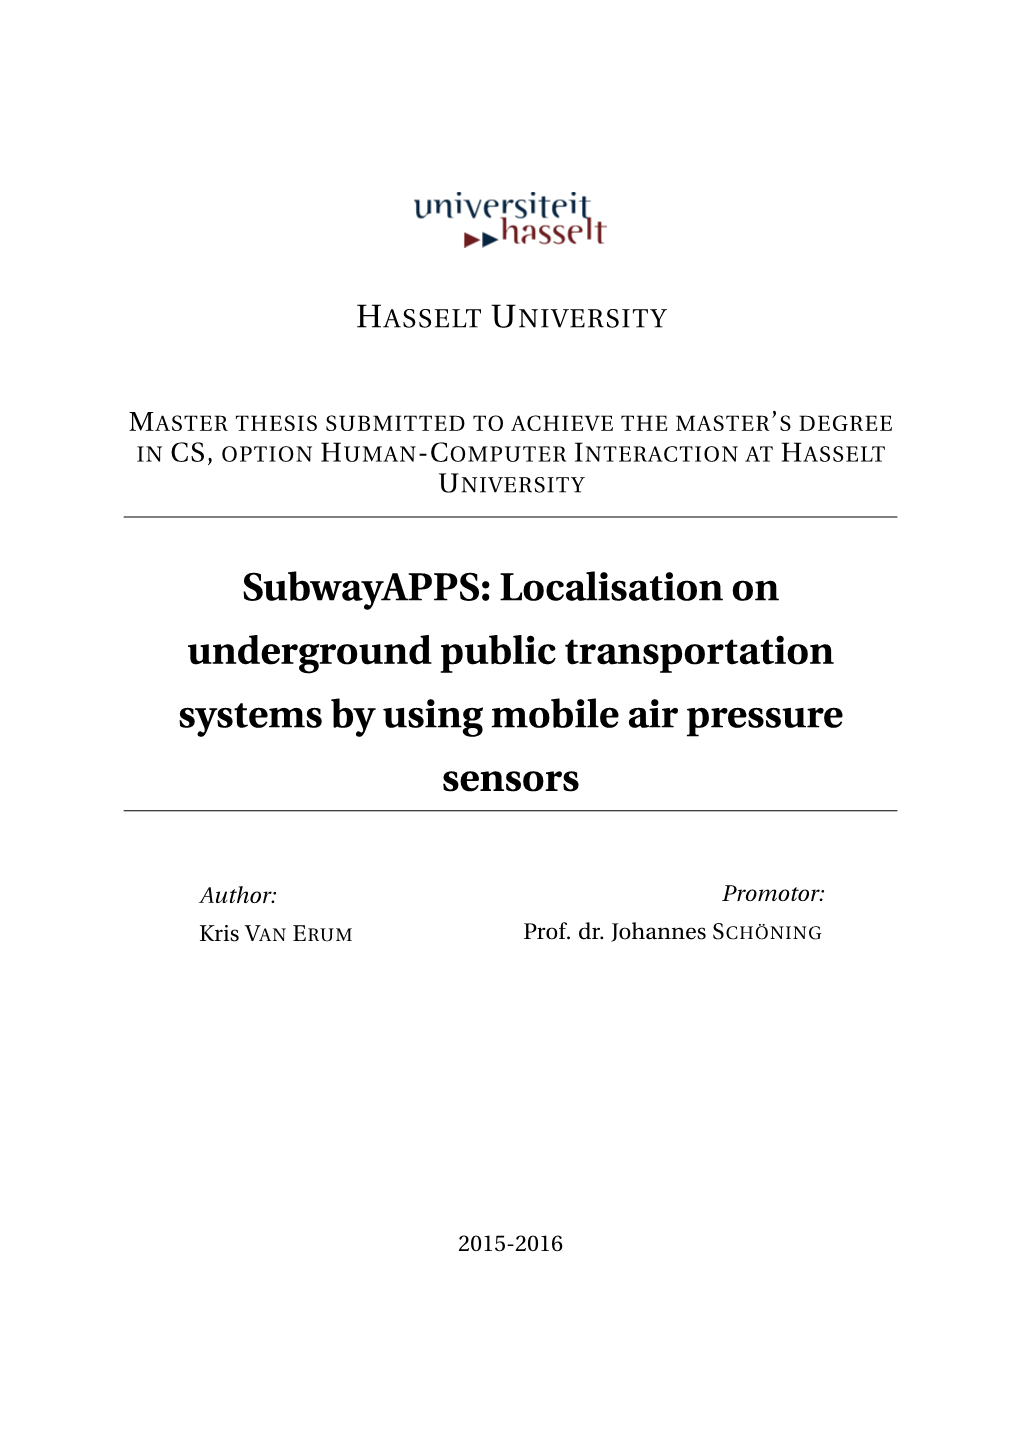 Localisation on Underground Public Transportation Systems by Using Mobile Air Pressure Sensors